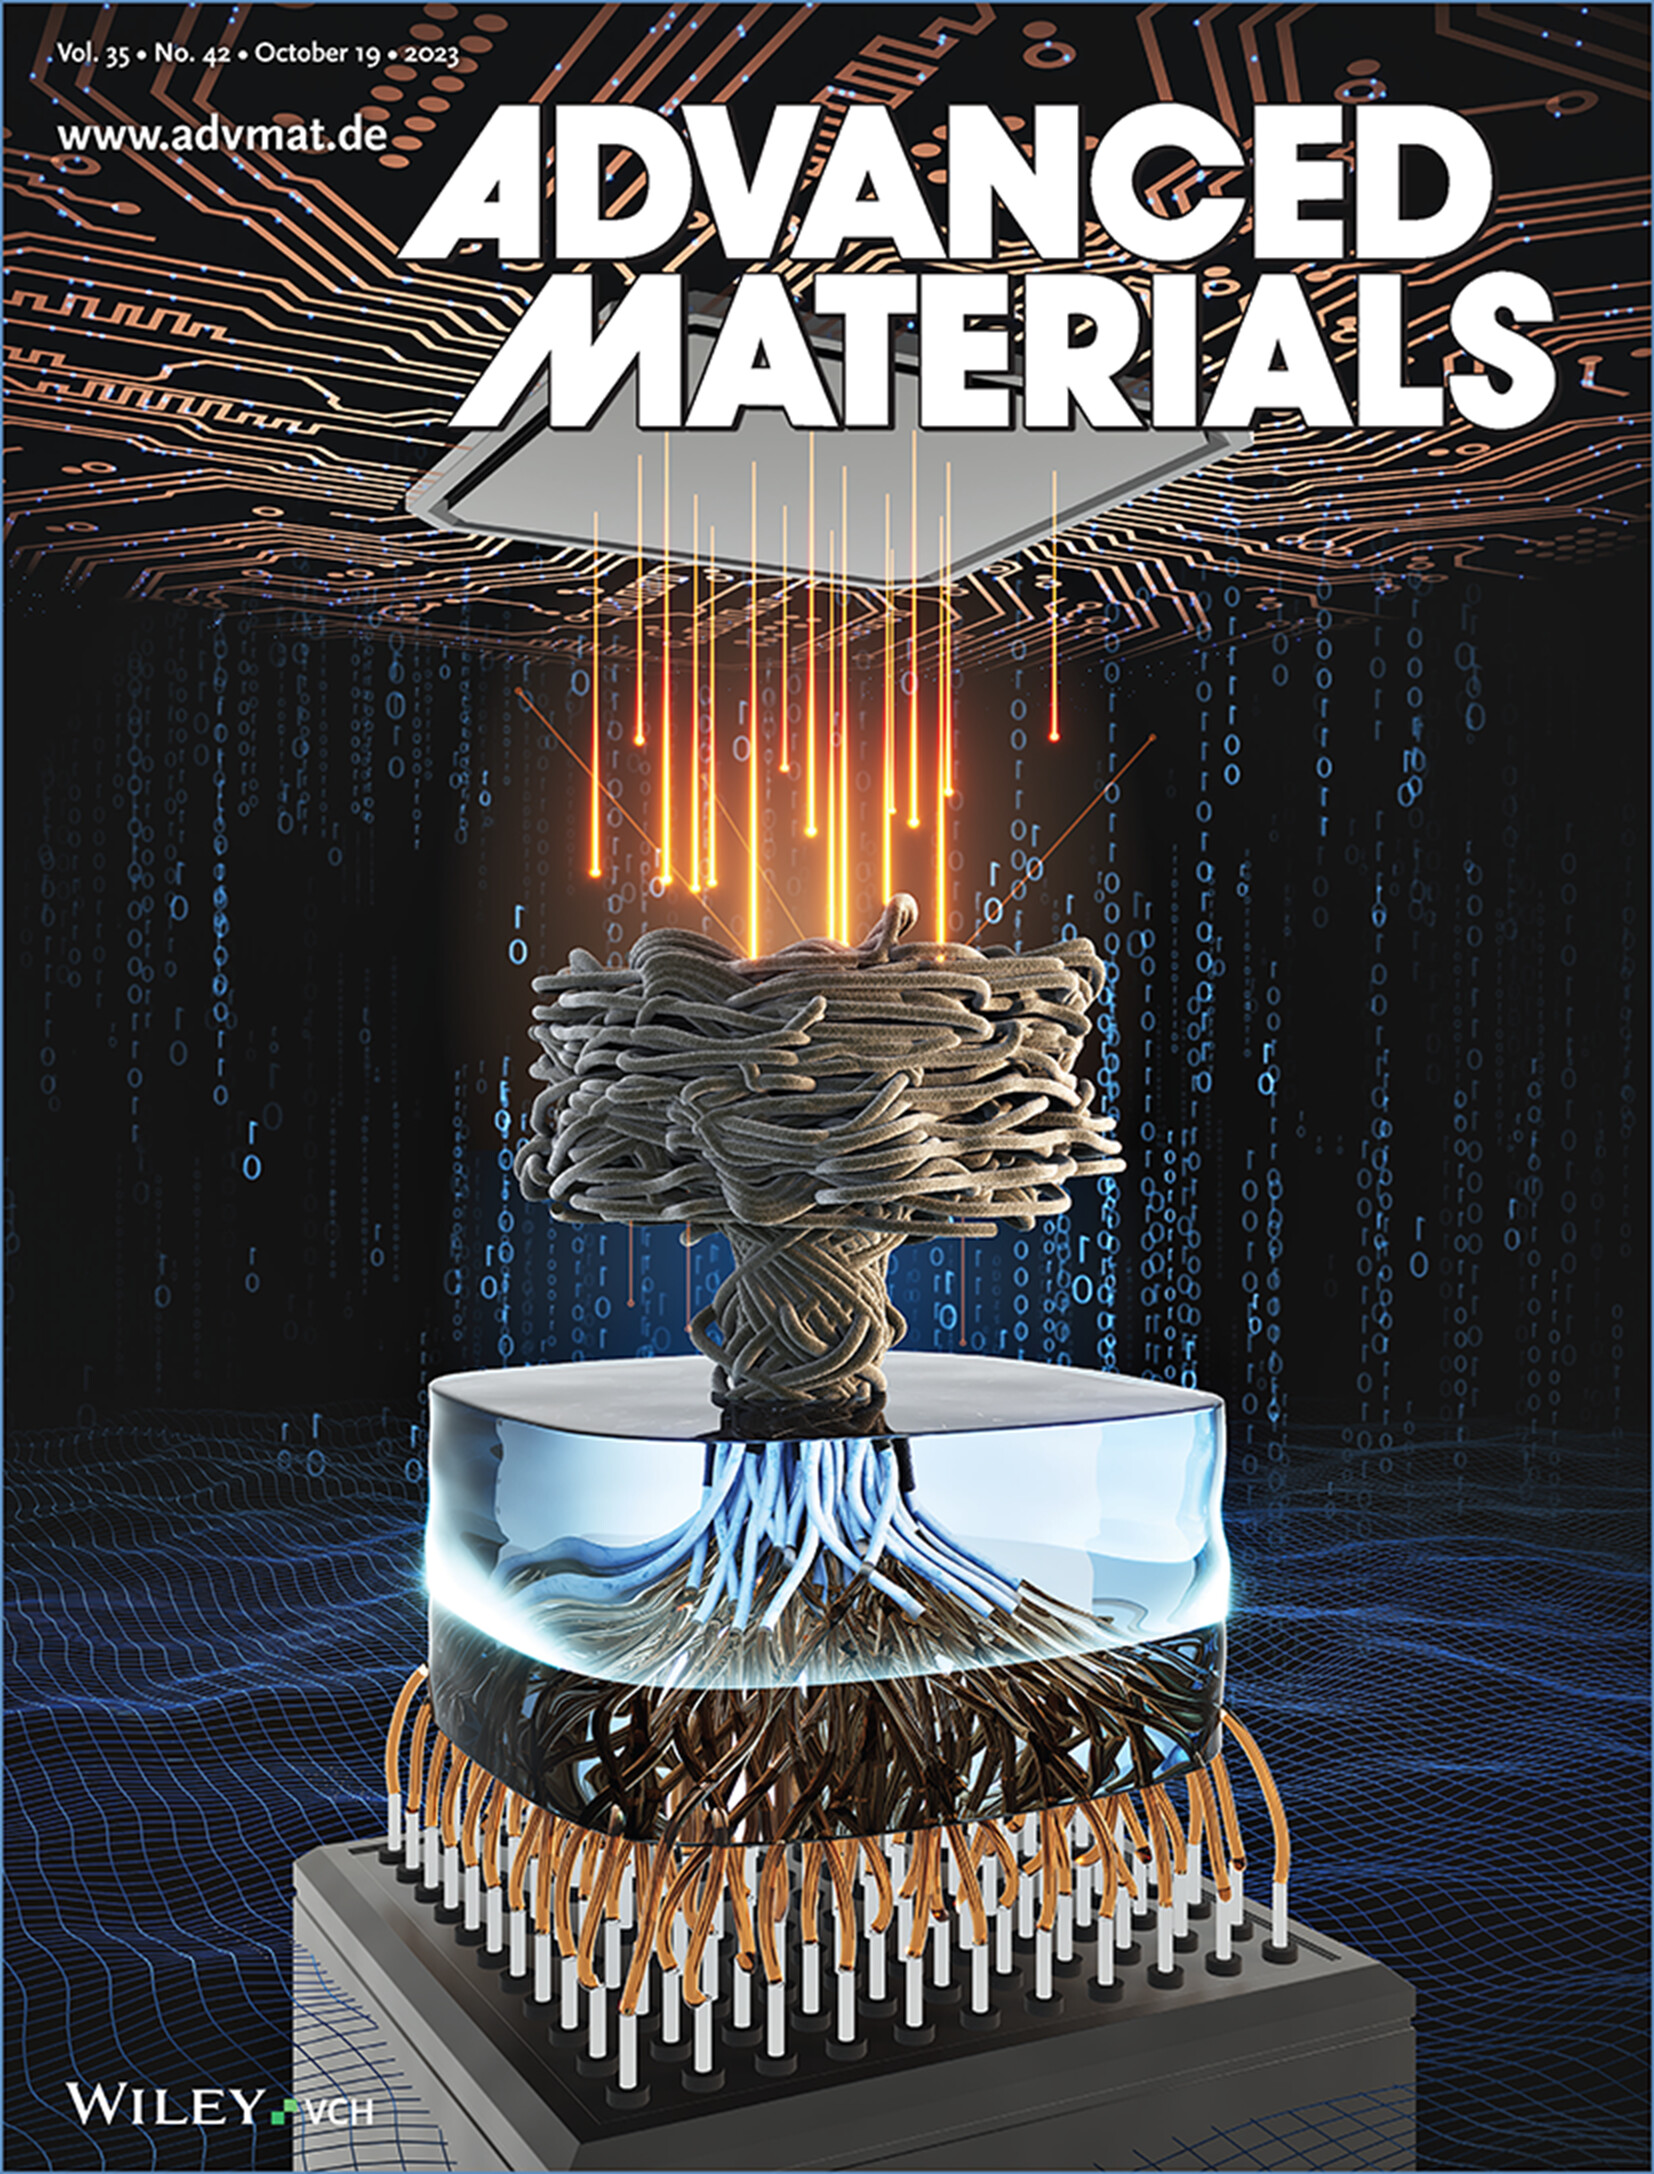 The cover of the October 19th 2023 edition of Advanced Materials